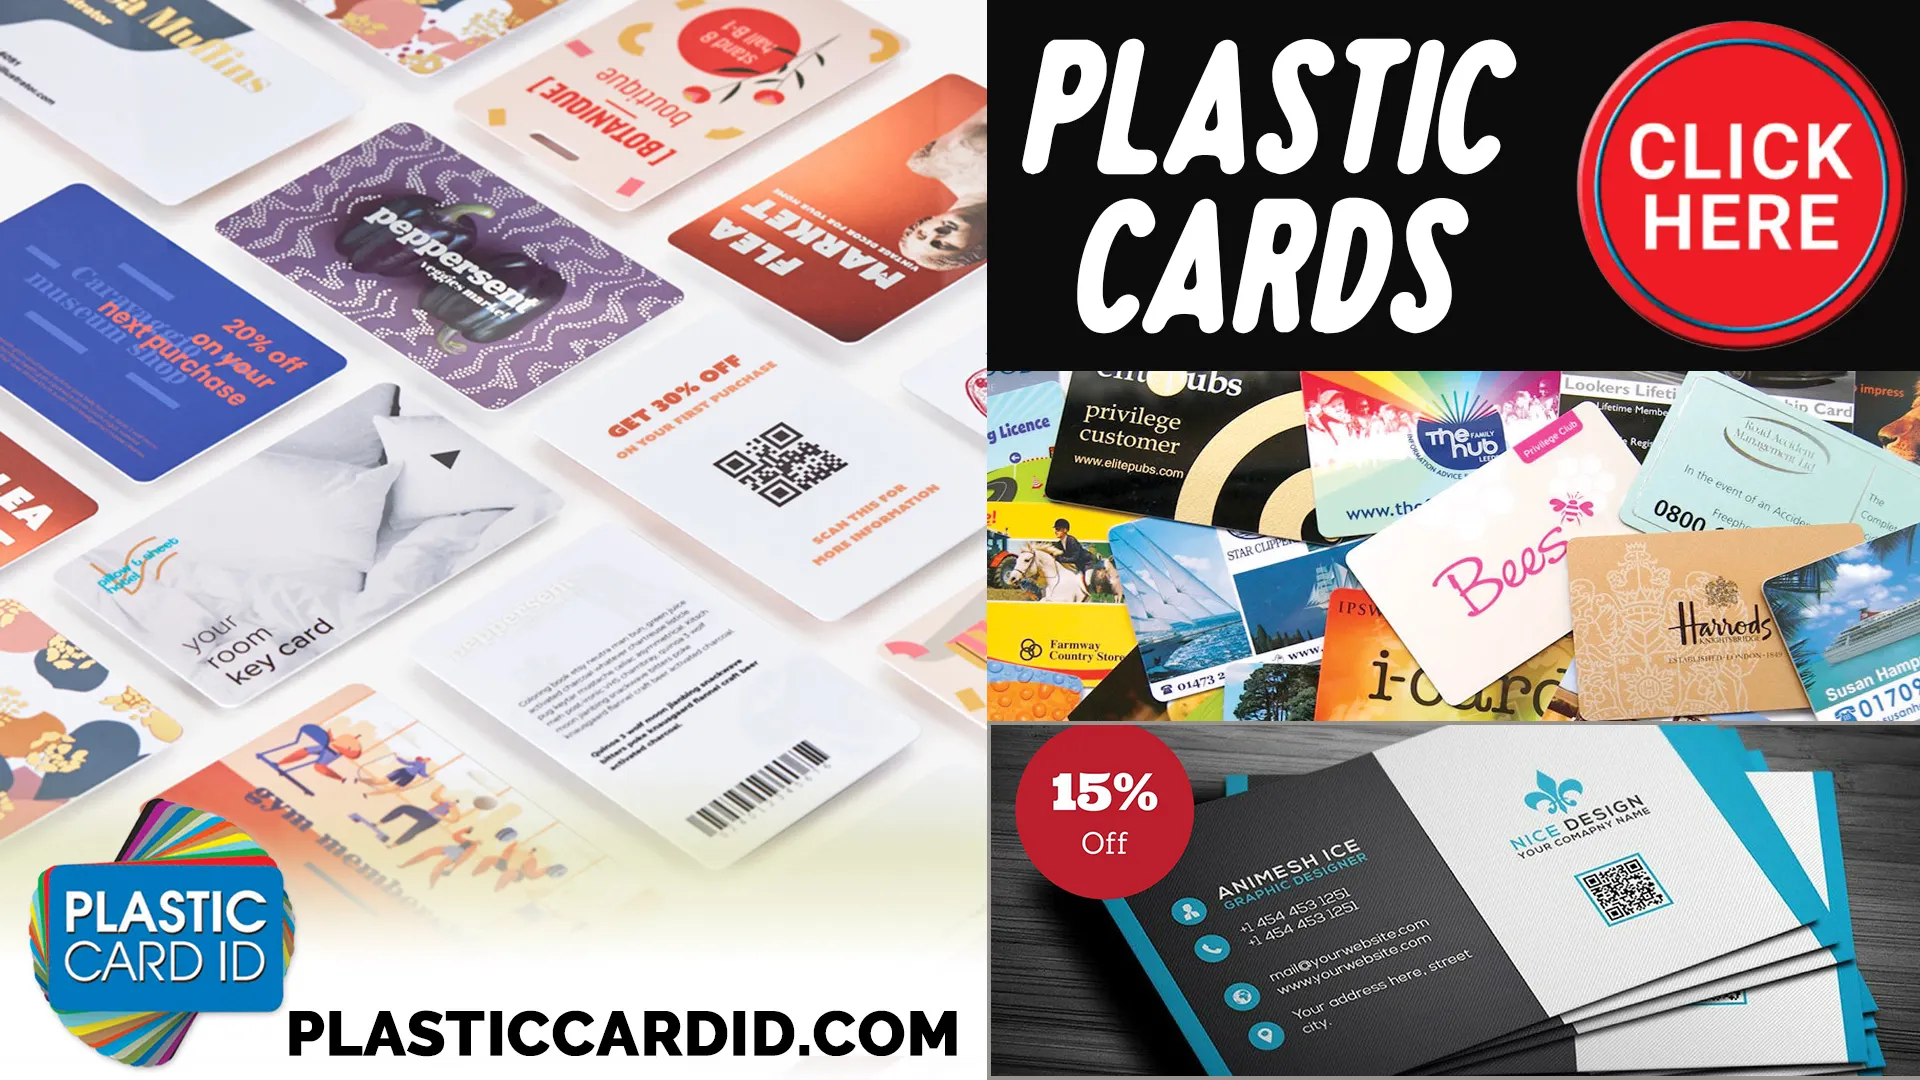 Welcome to Plastic Card ID
's Journey Towards Sustainable Card Printing